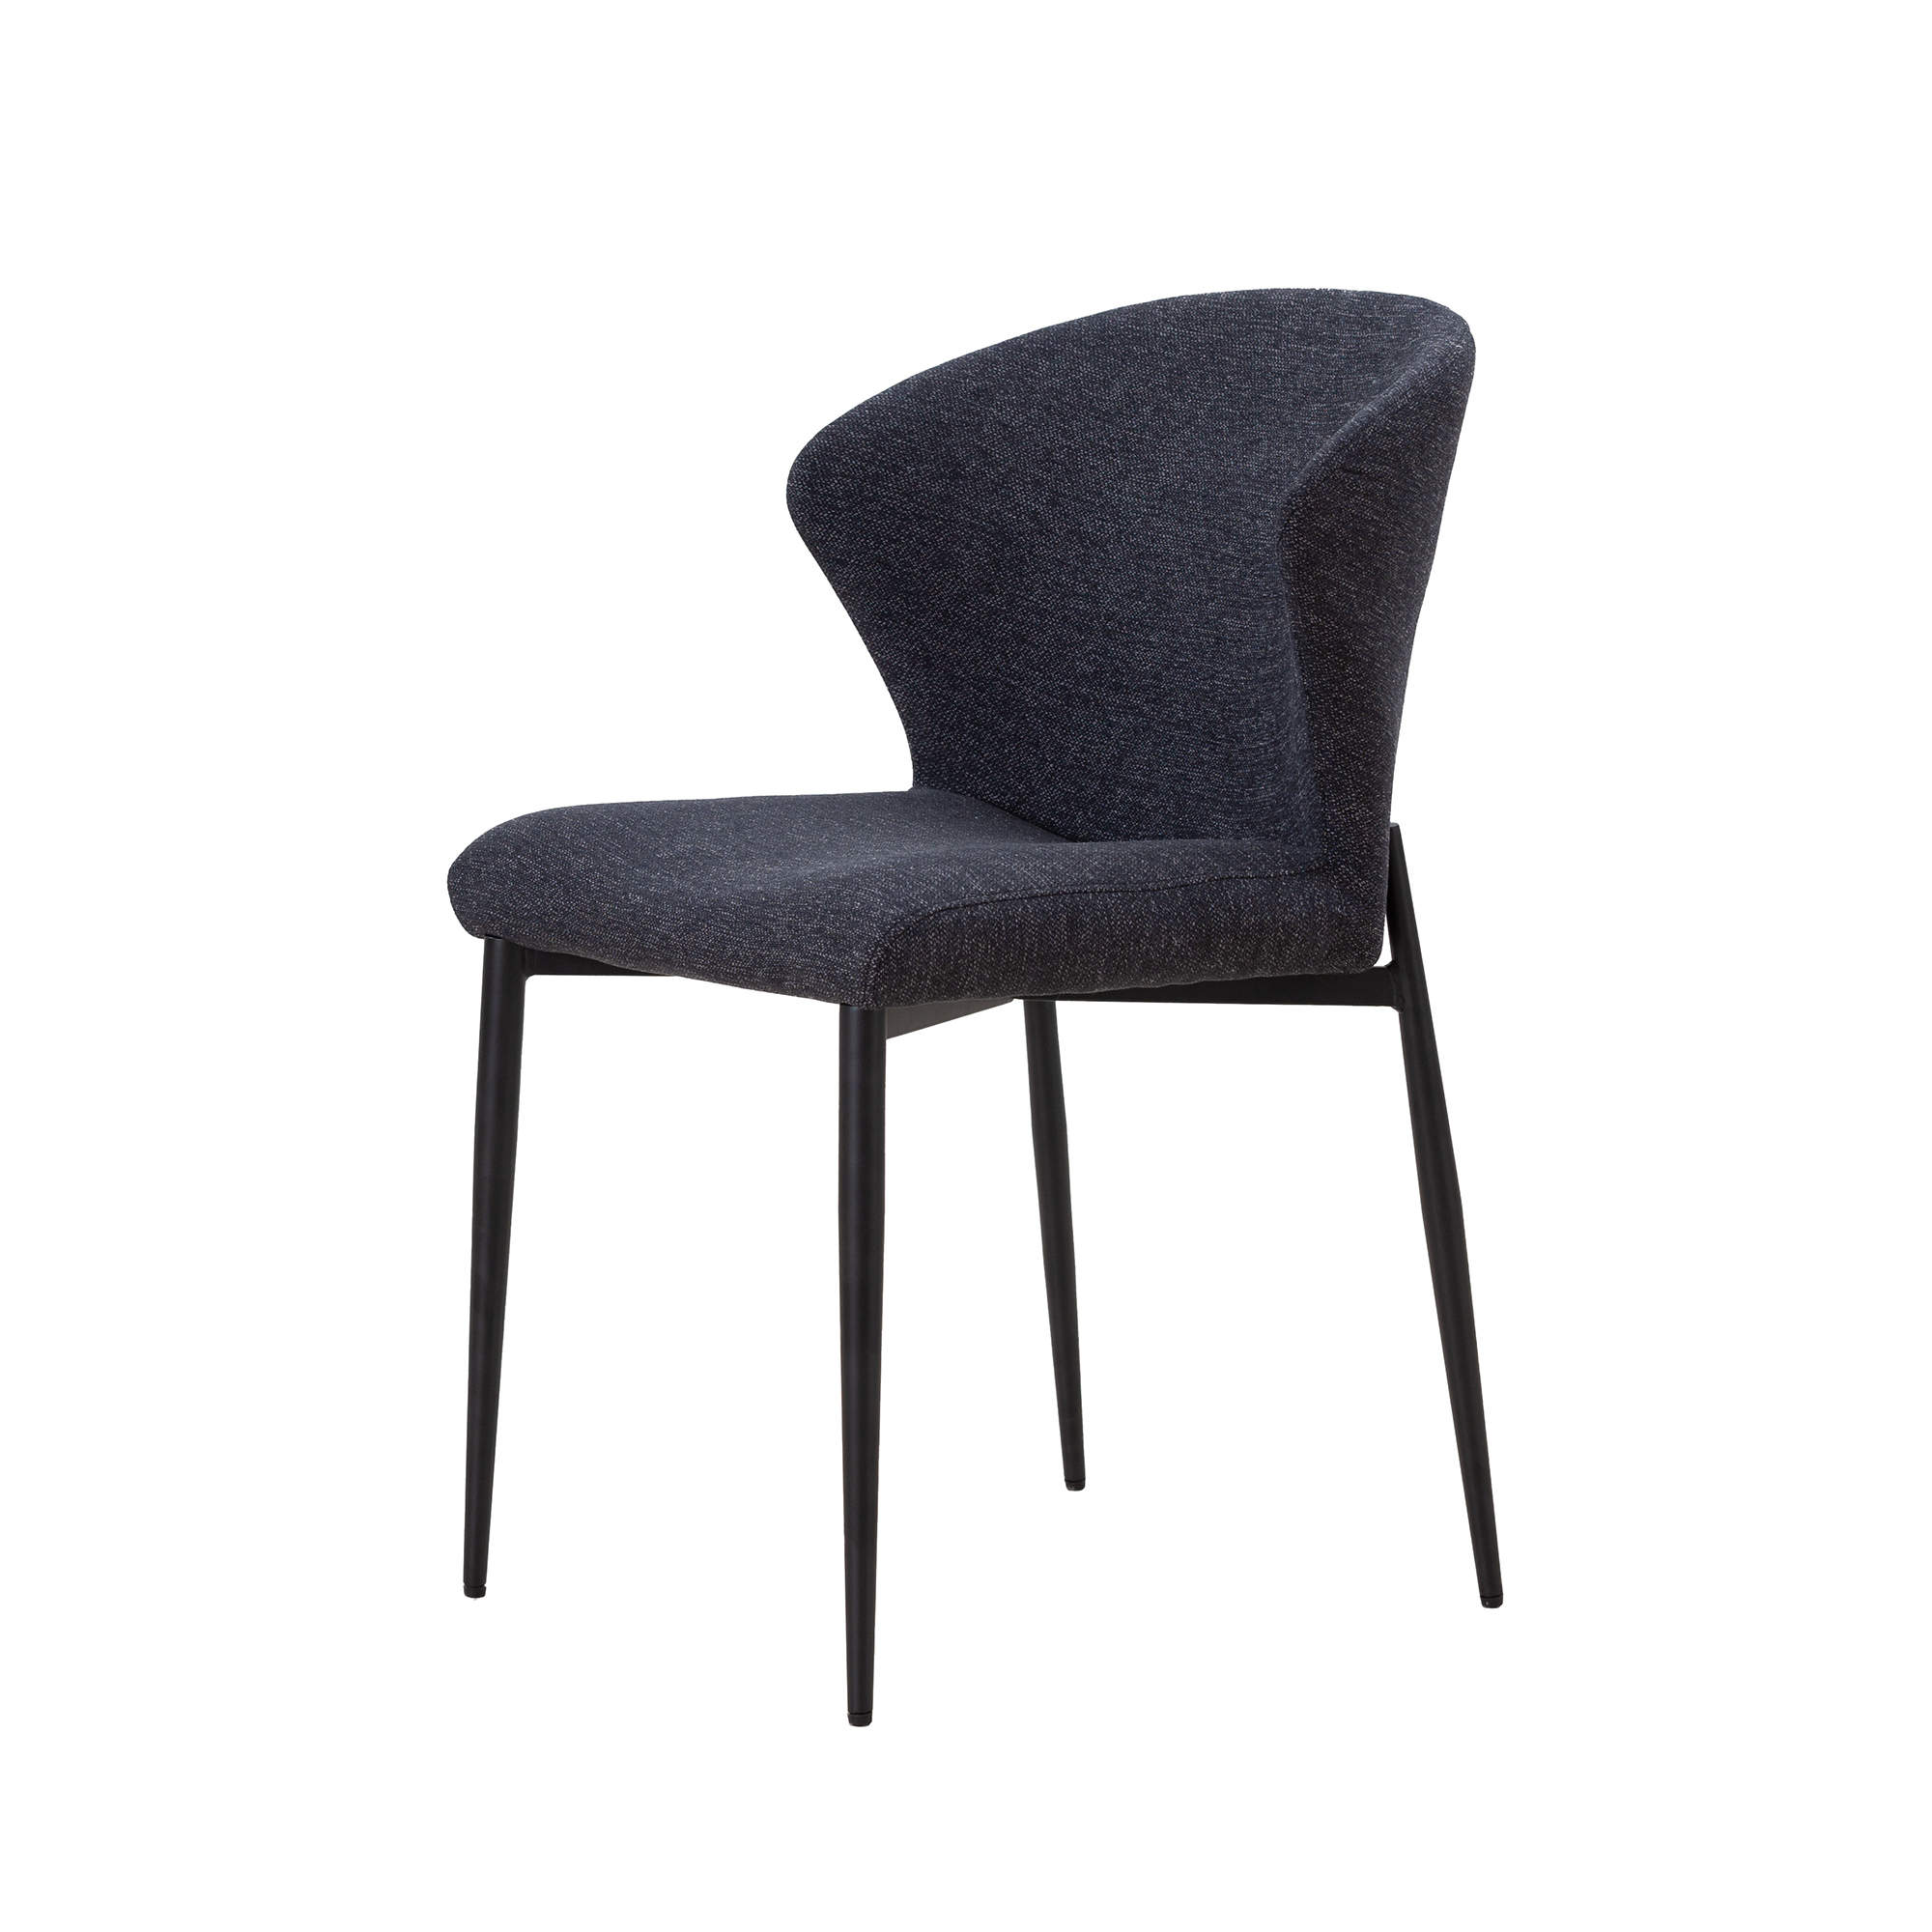 Mordern Dining Chairs(set of 2)